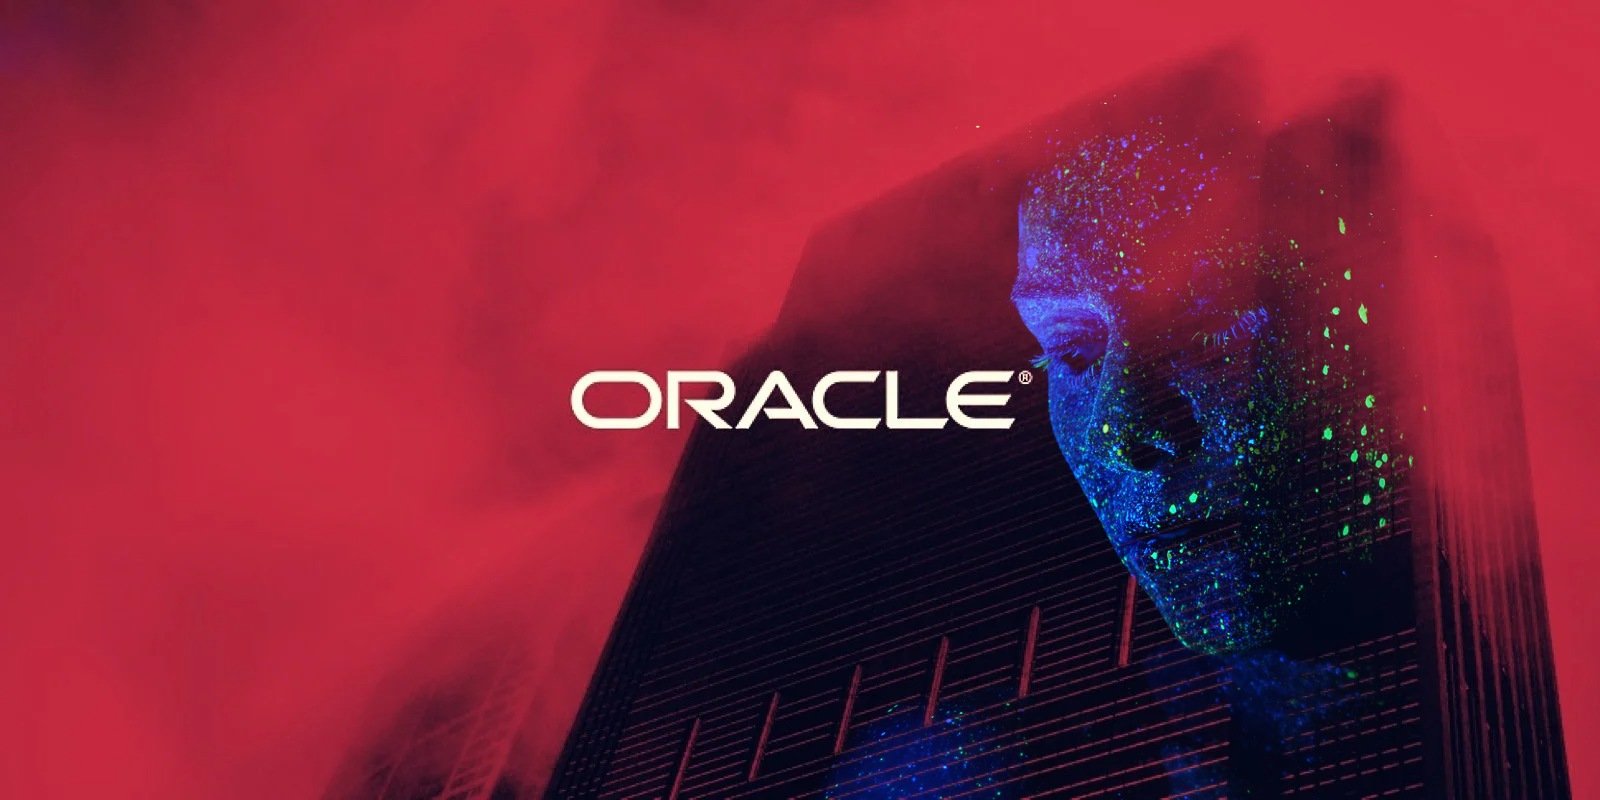 Critical Oracle WebLogic flaw actively exploited by DarkIRC malware